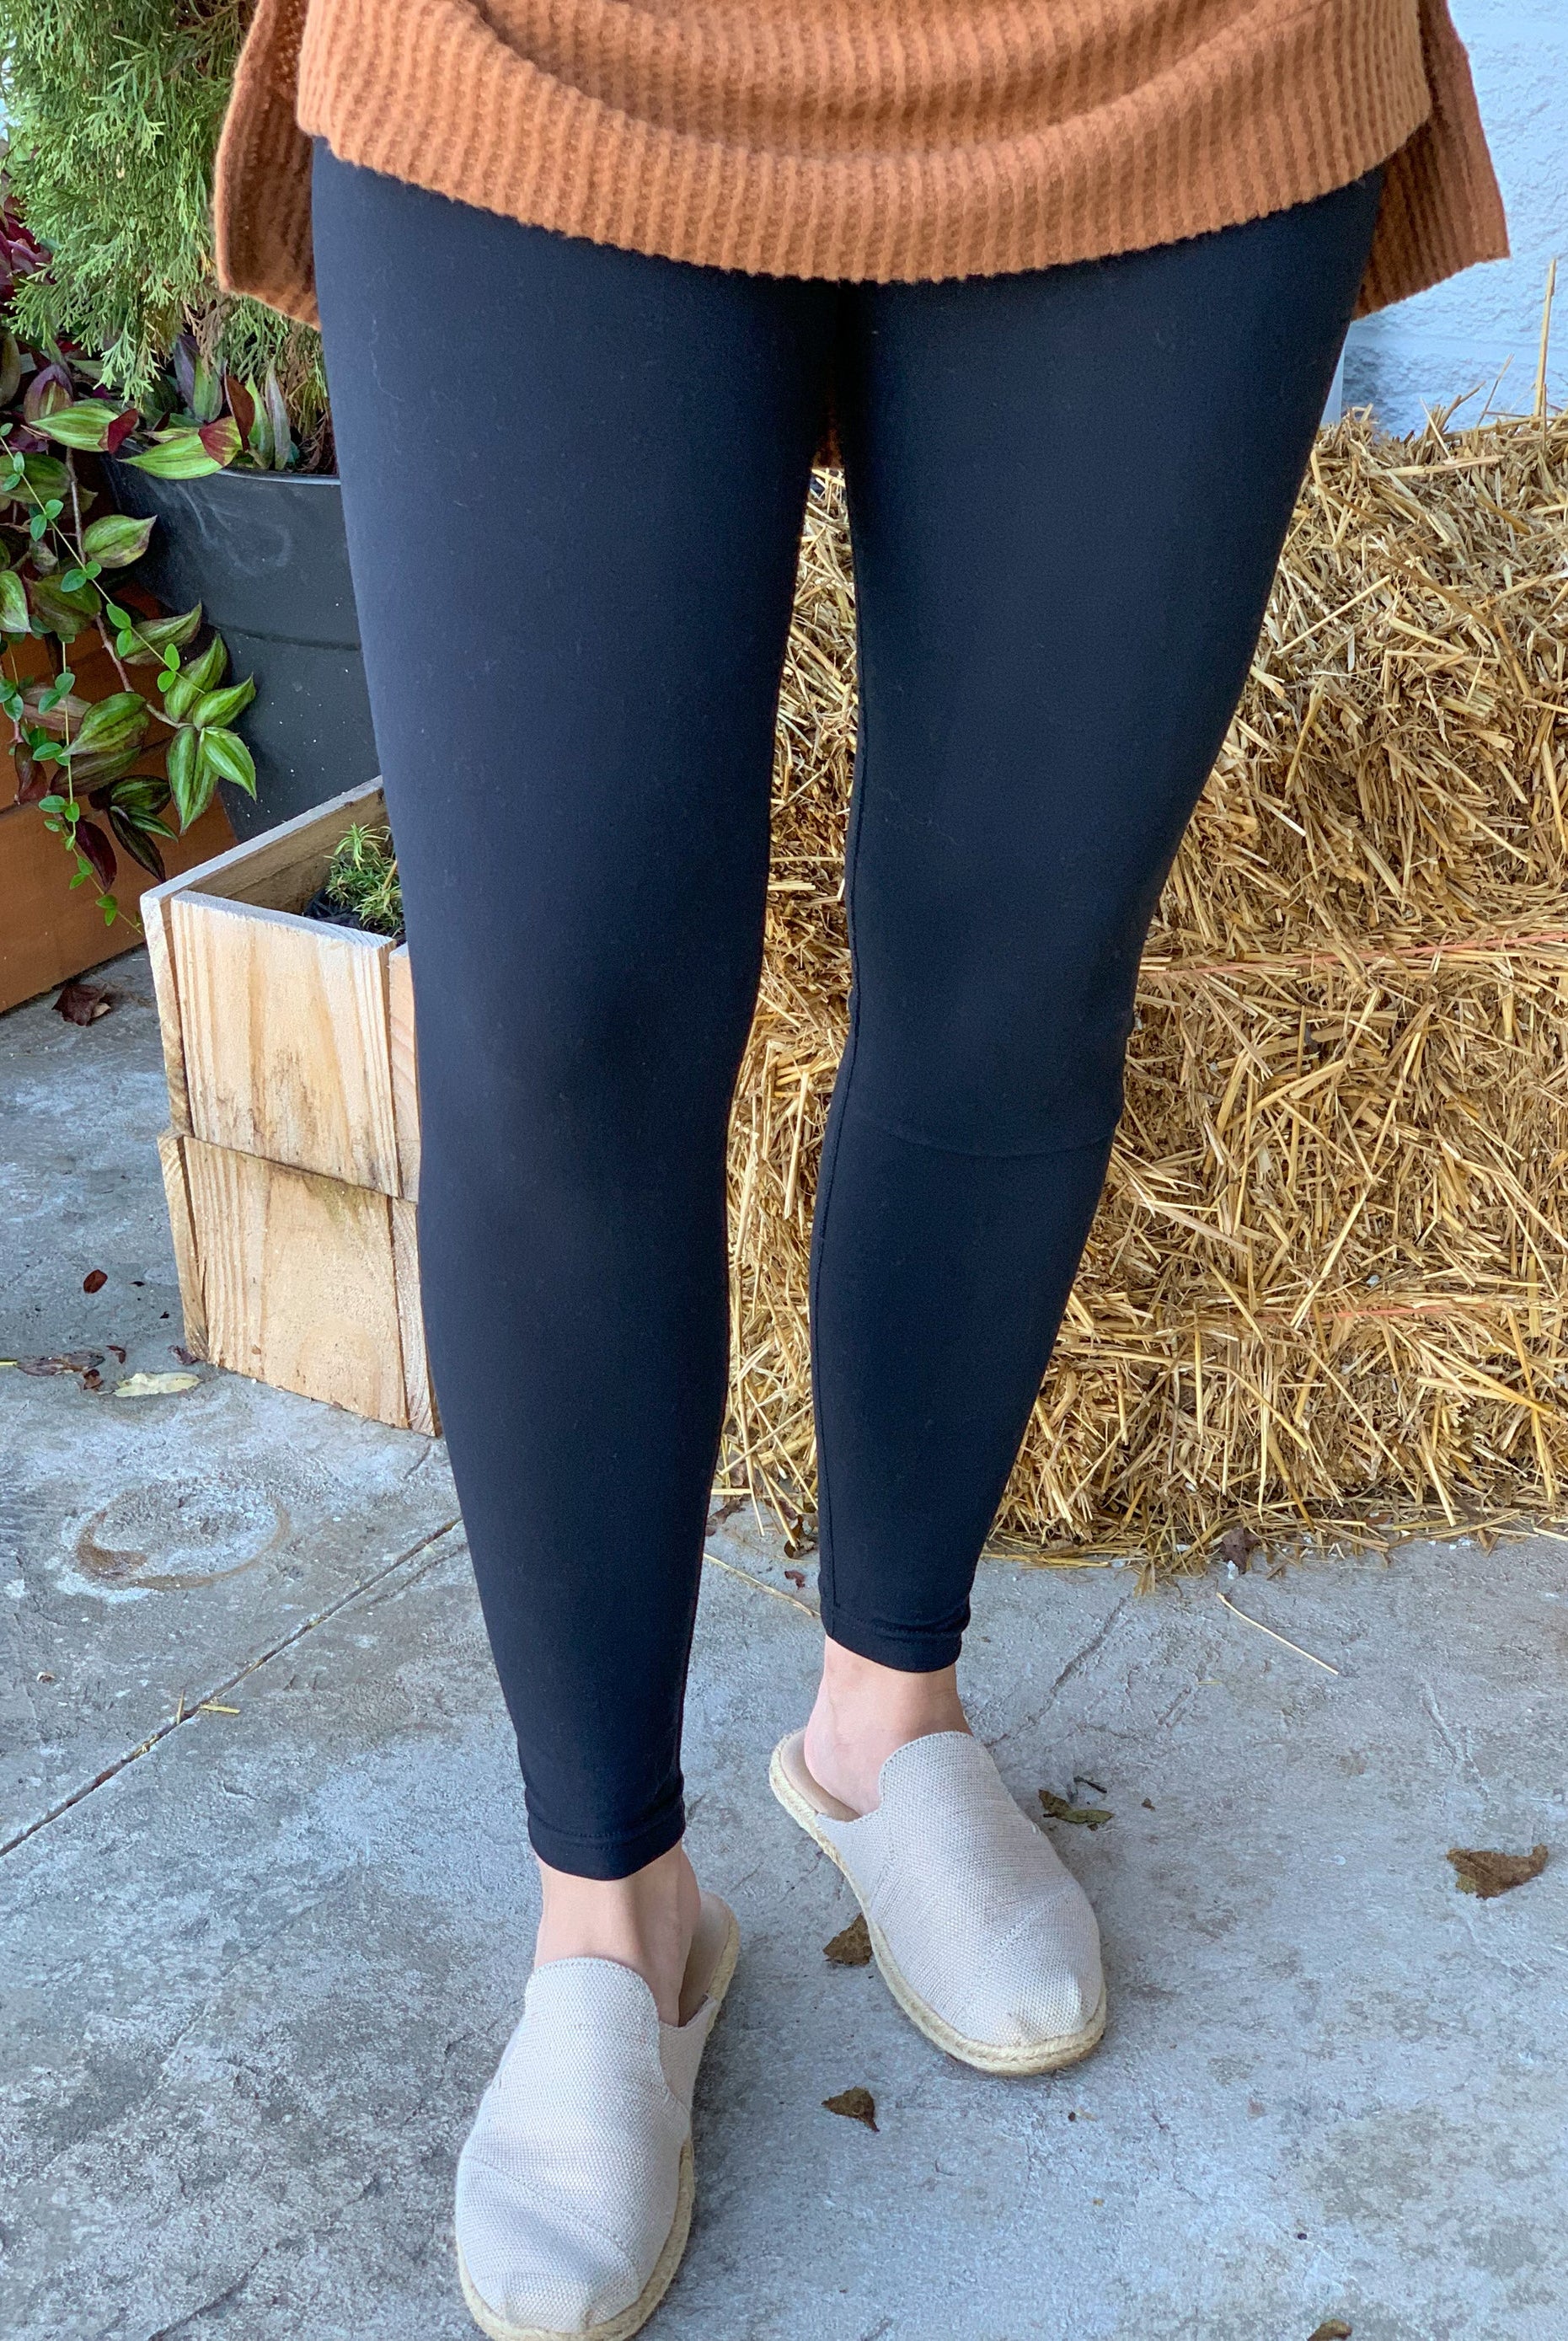 Living In These Leggings 2.0-220 Joggers/Leggings-The Lovely Closet-The Lovely Closet, Women's Fashion Boutique in Alexandria, KY